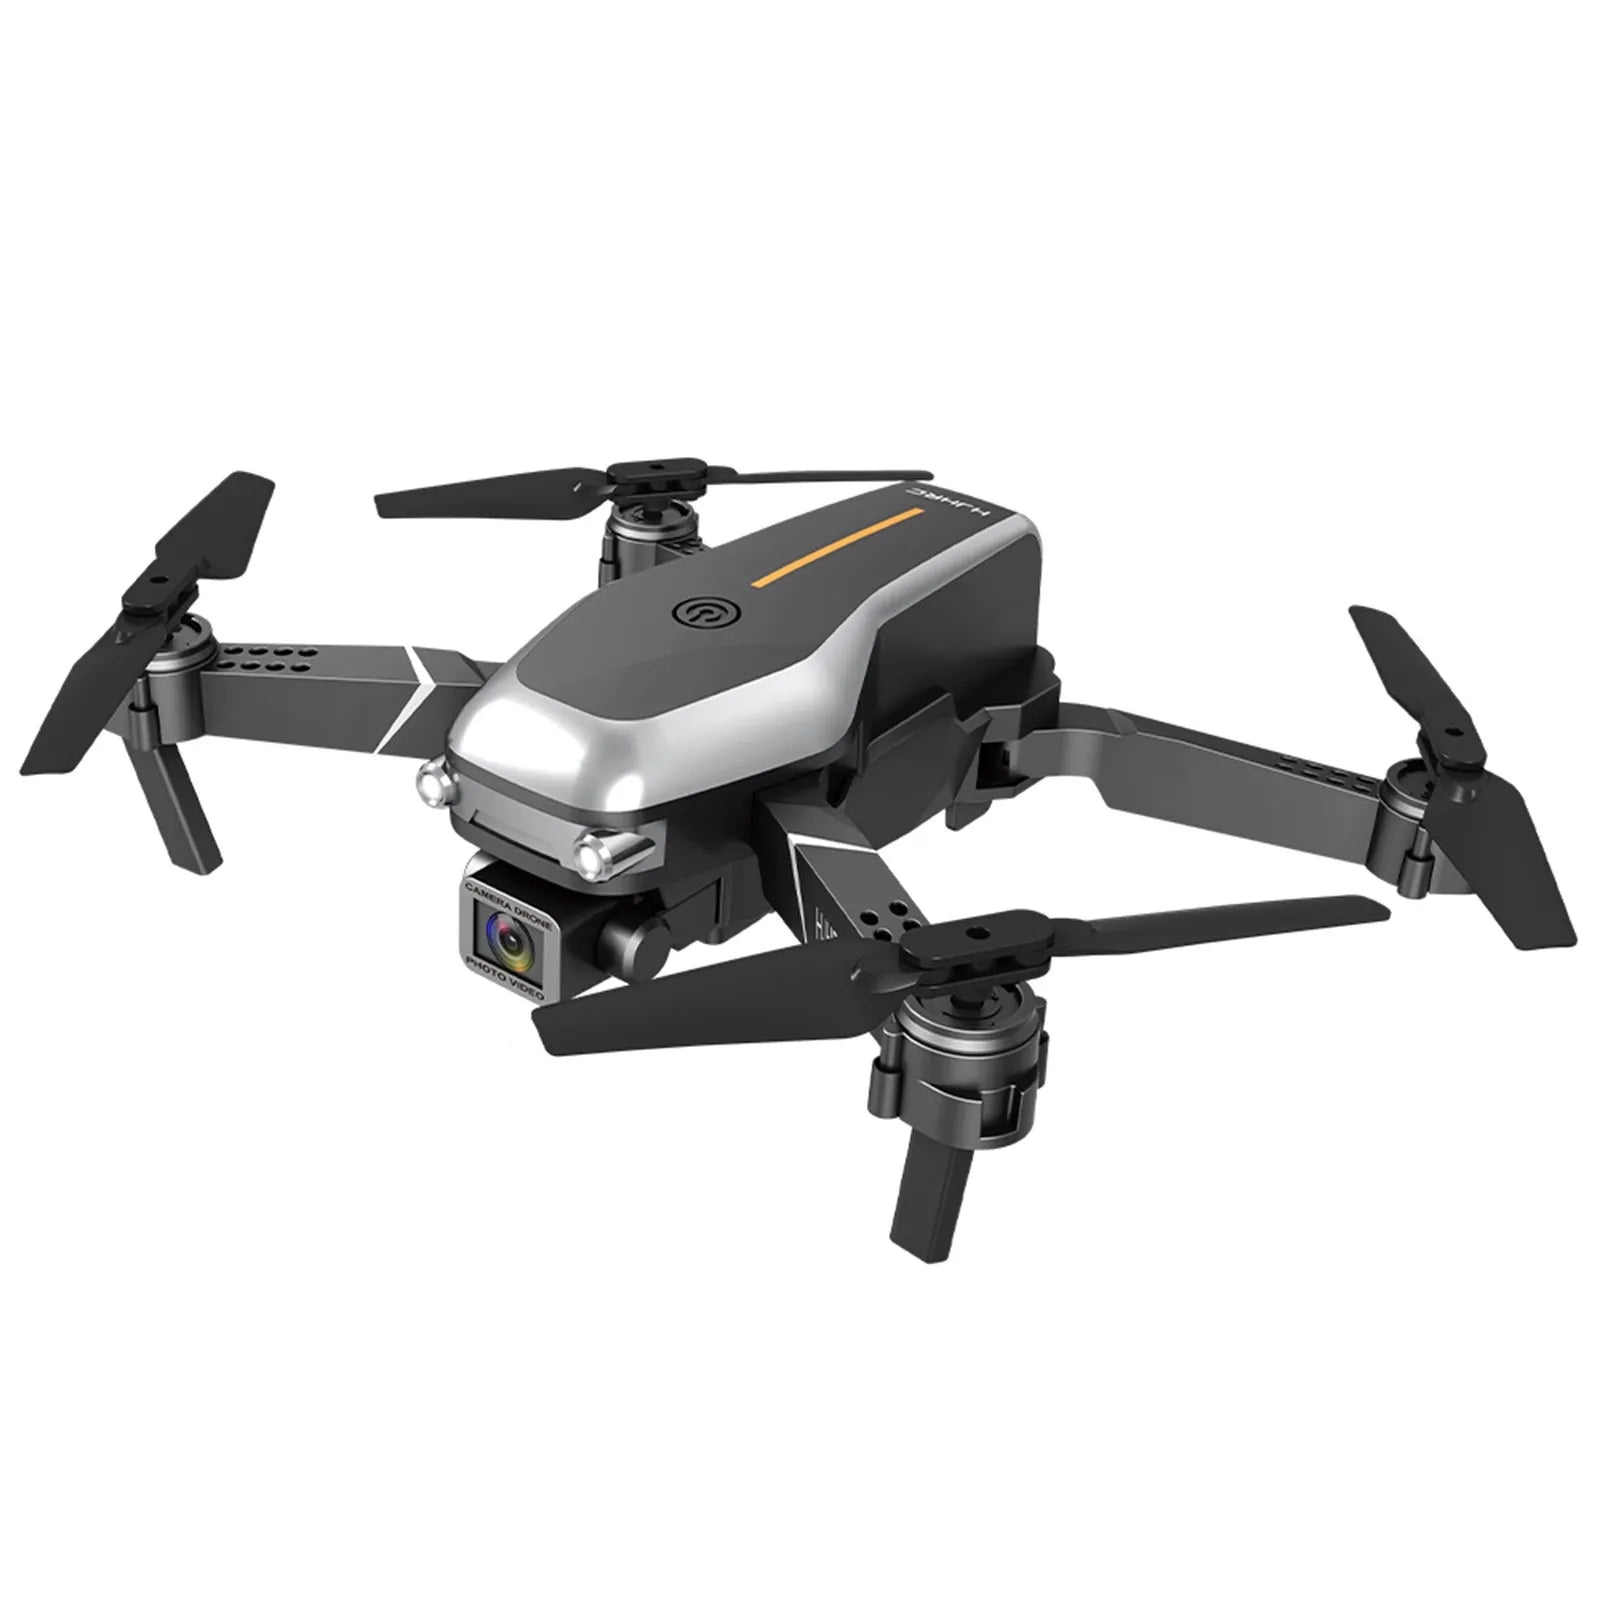 HJ95 Drone, headless mode and fascinating flip function are very convenient even for drone beginners